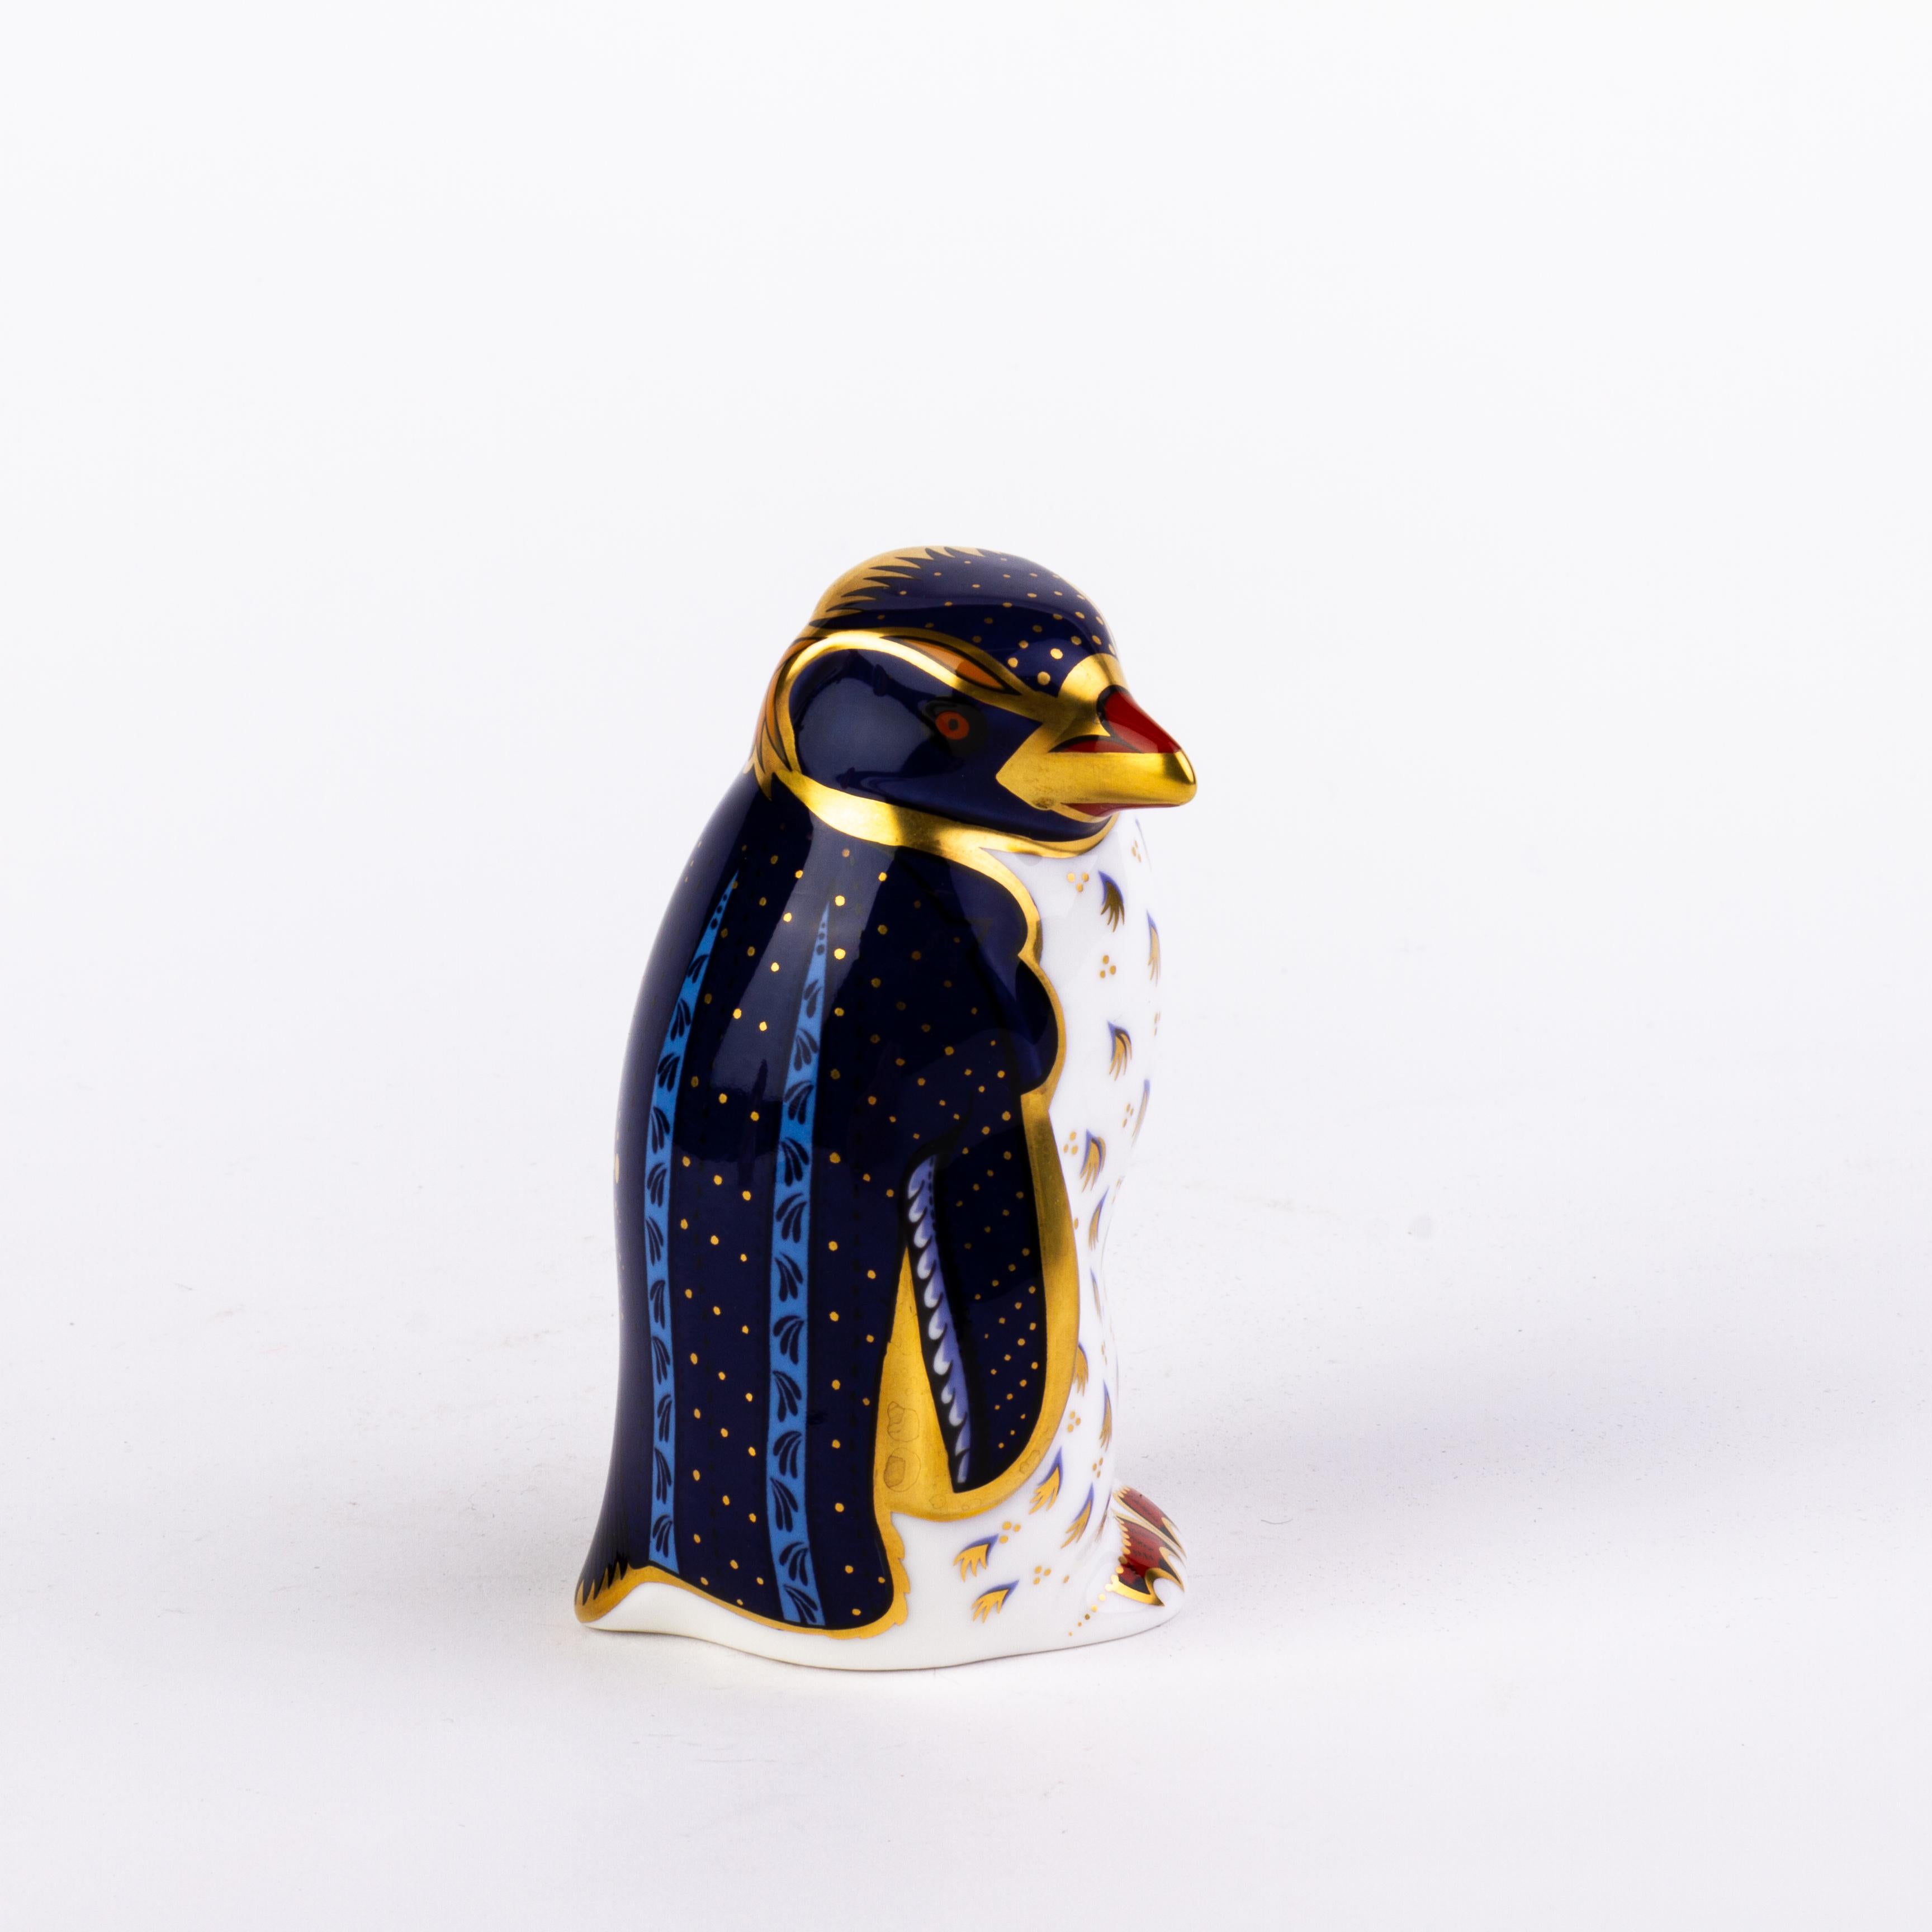 English Royal Crown Derby 24K Gold Porcelain Paperweight Penguin
Good condition
From a private collection.
Free international shipping.